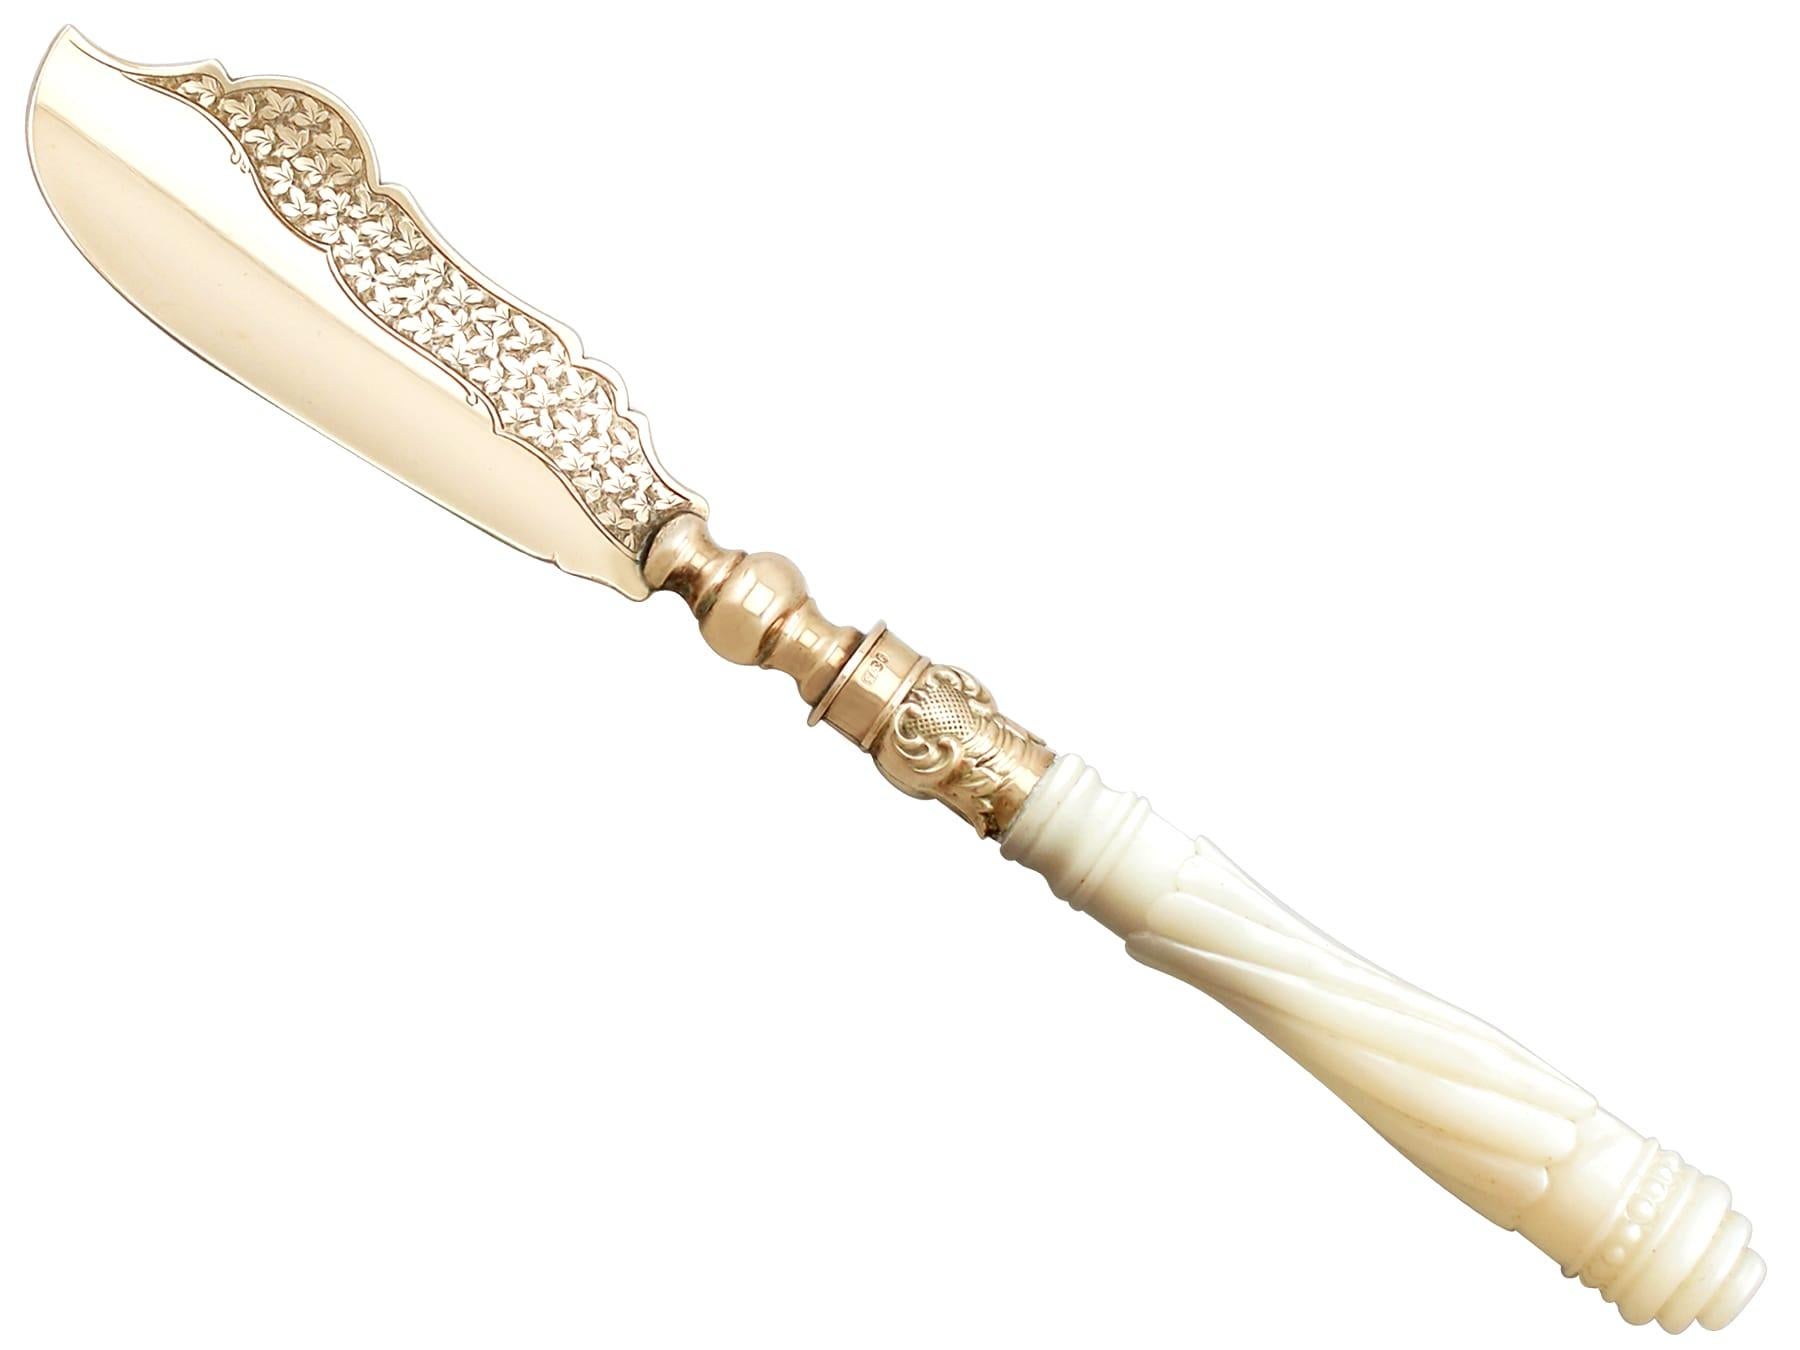 An exceptional, fine and impressive antique Victorian English 9-carat yellow gold and mother of pearl handled butter knife, boxed, an addition to our diverse flatware collection.

This exceptional antique Victorian 9-karat gold butter knife has a